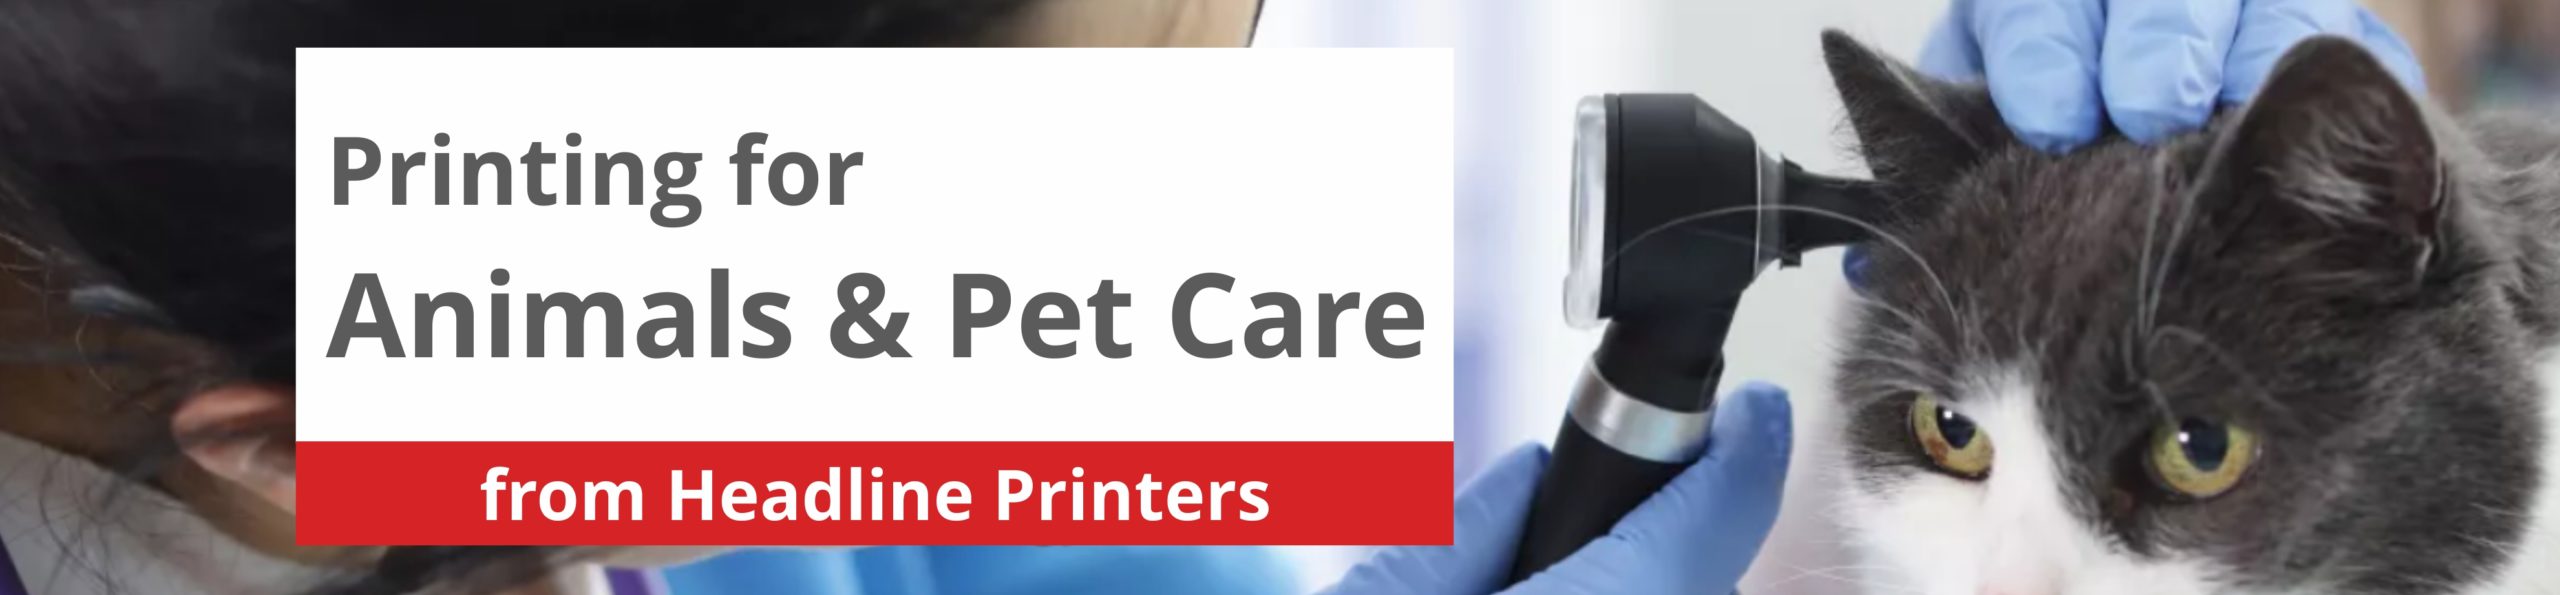 Printing for Animals and Pet Care